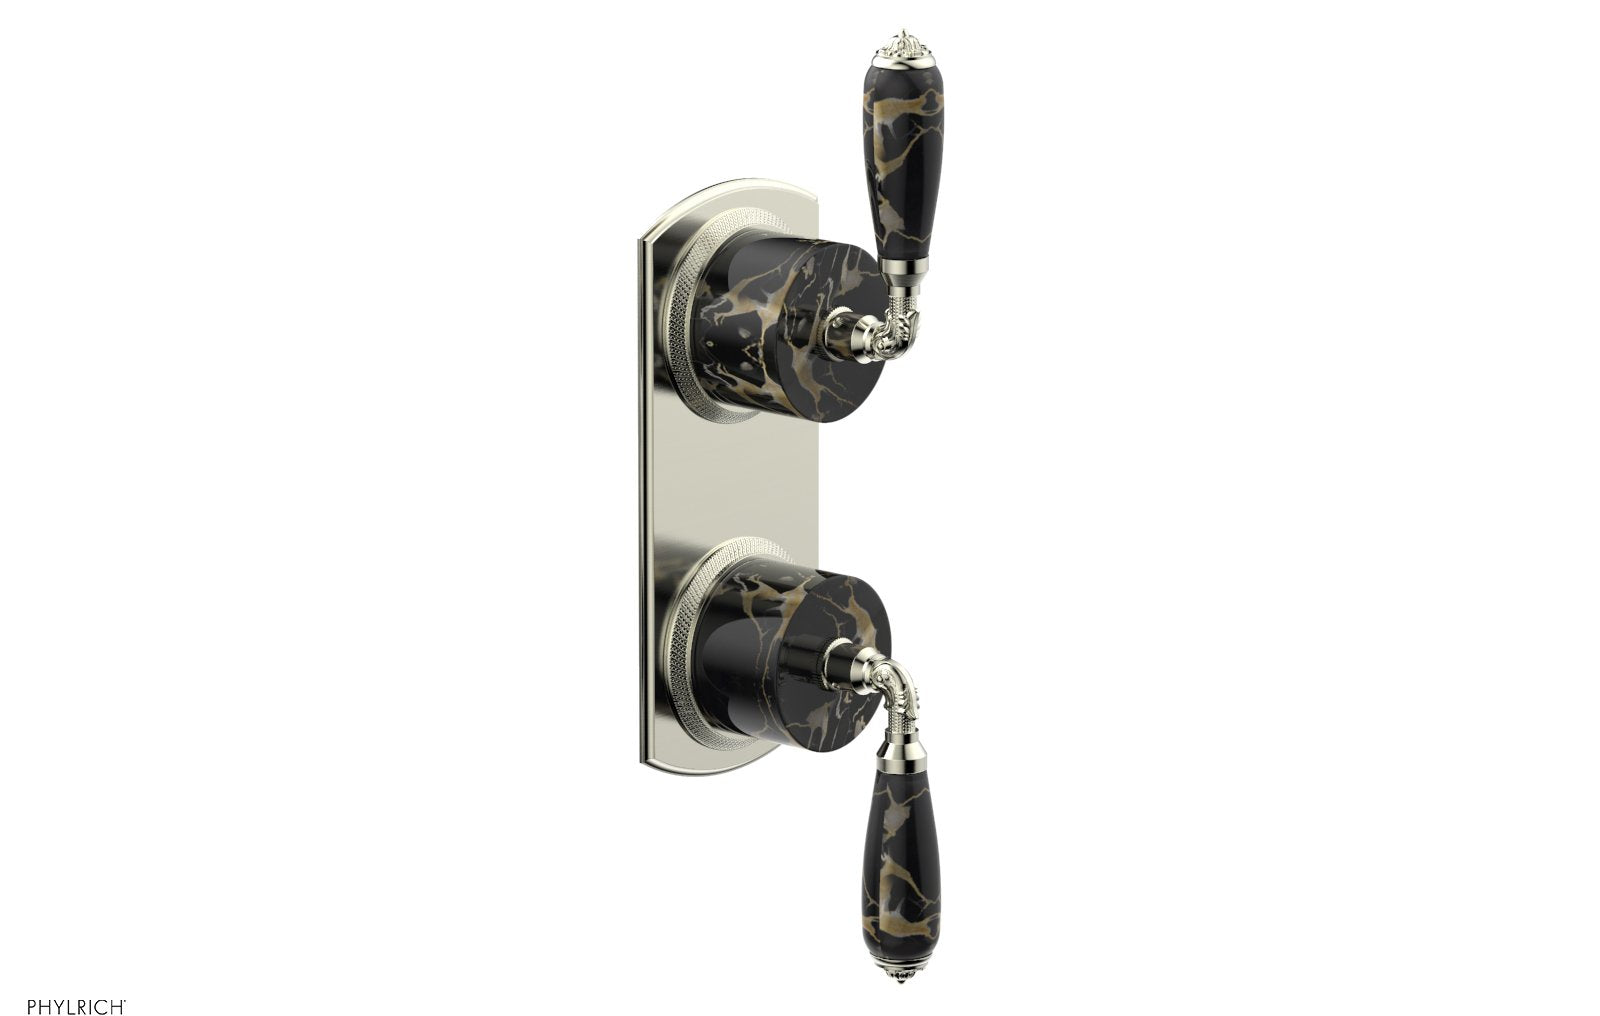 Phylrich VALENCIA Thermostatic Valve with Volume Control or Diverter, Black Marble Lever Handles